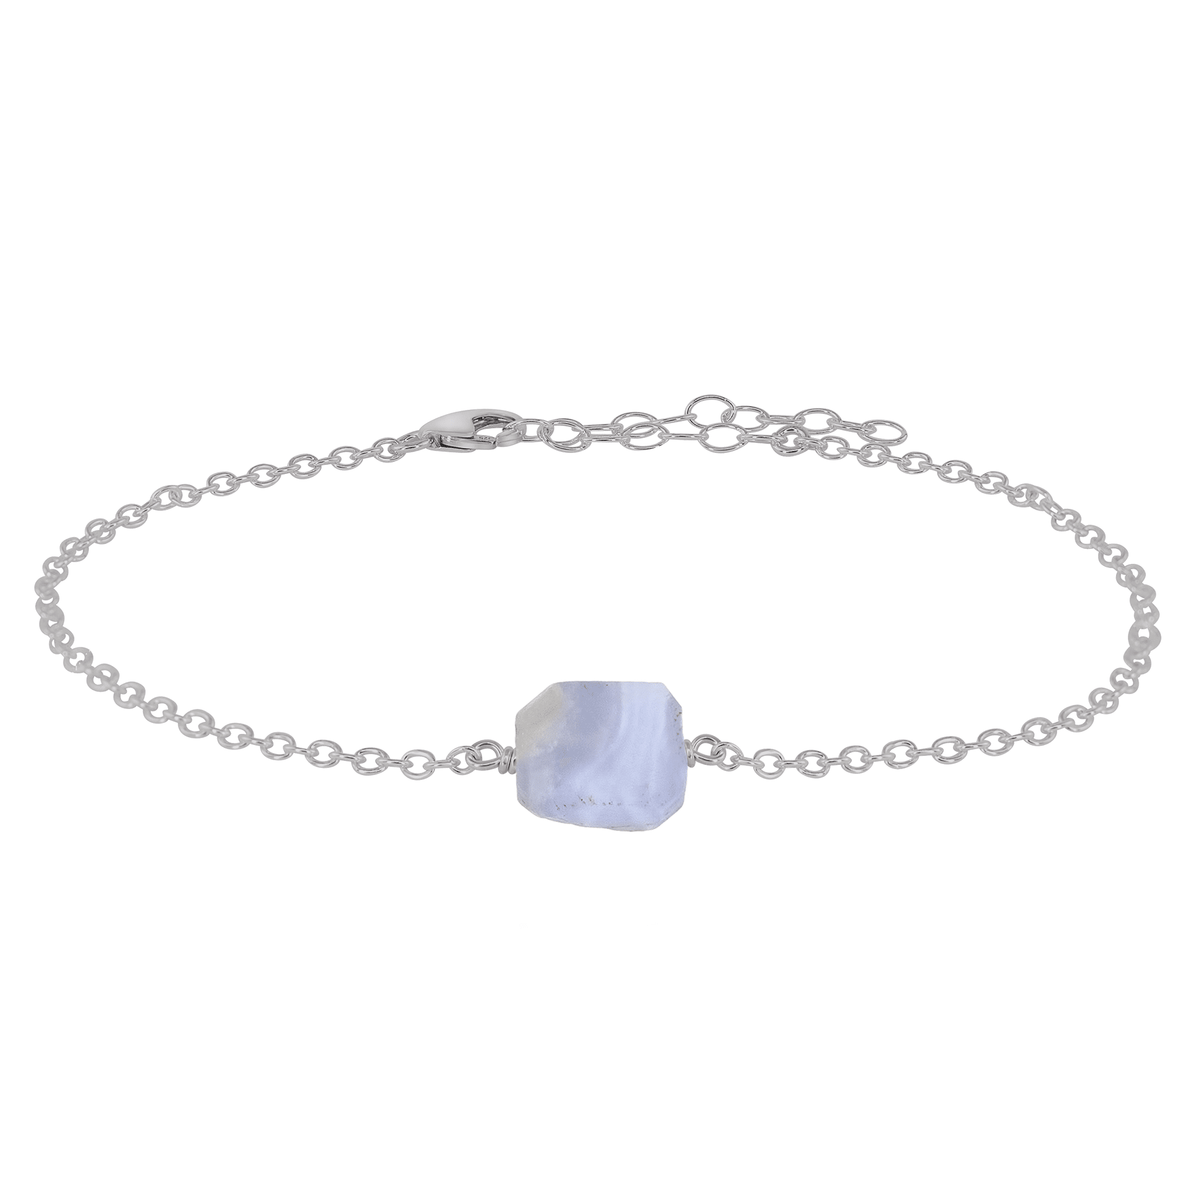 Raw Nugget Anklet - Blue Lace Agate - Stainless Steel - Luna Tide Handmade Jewellery